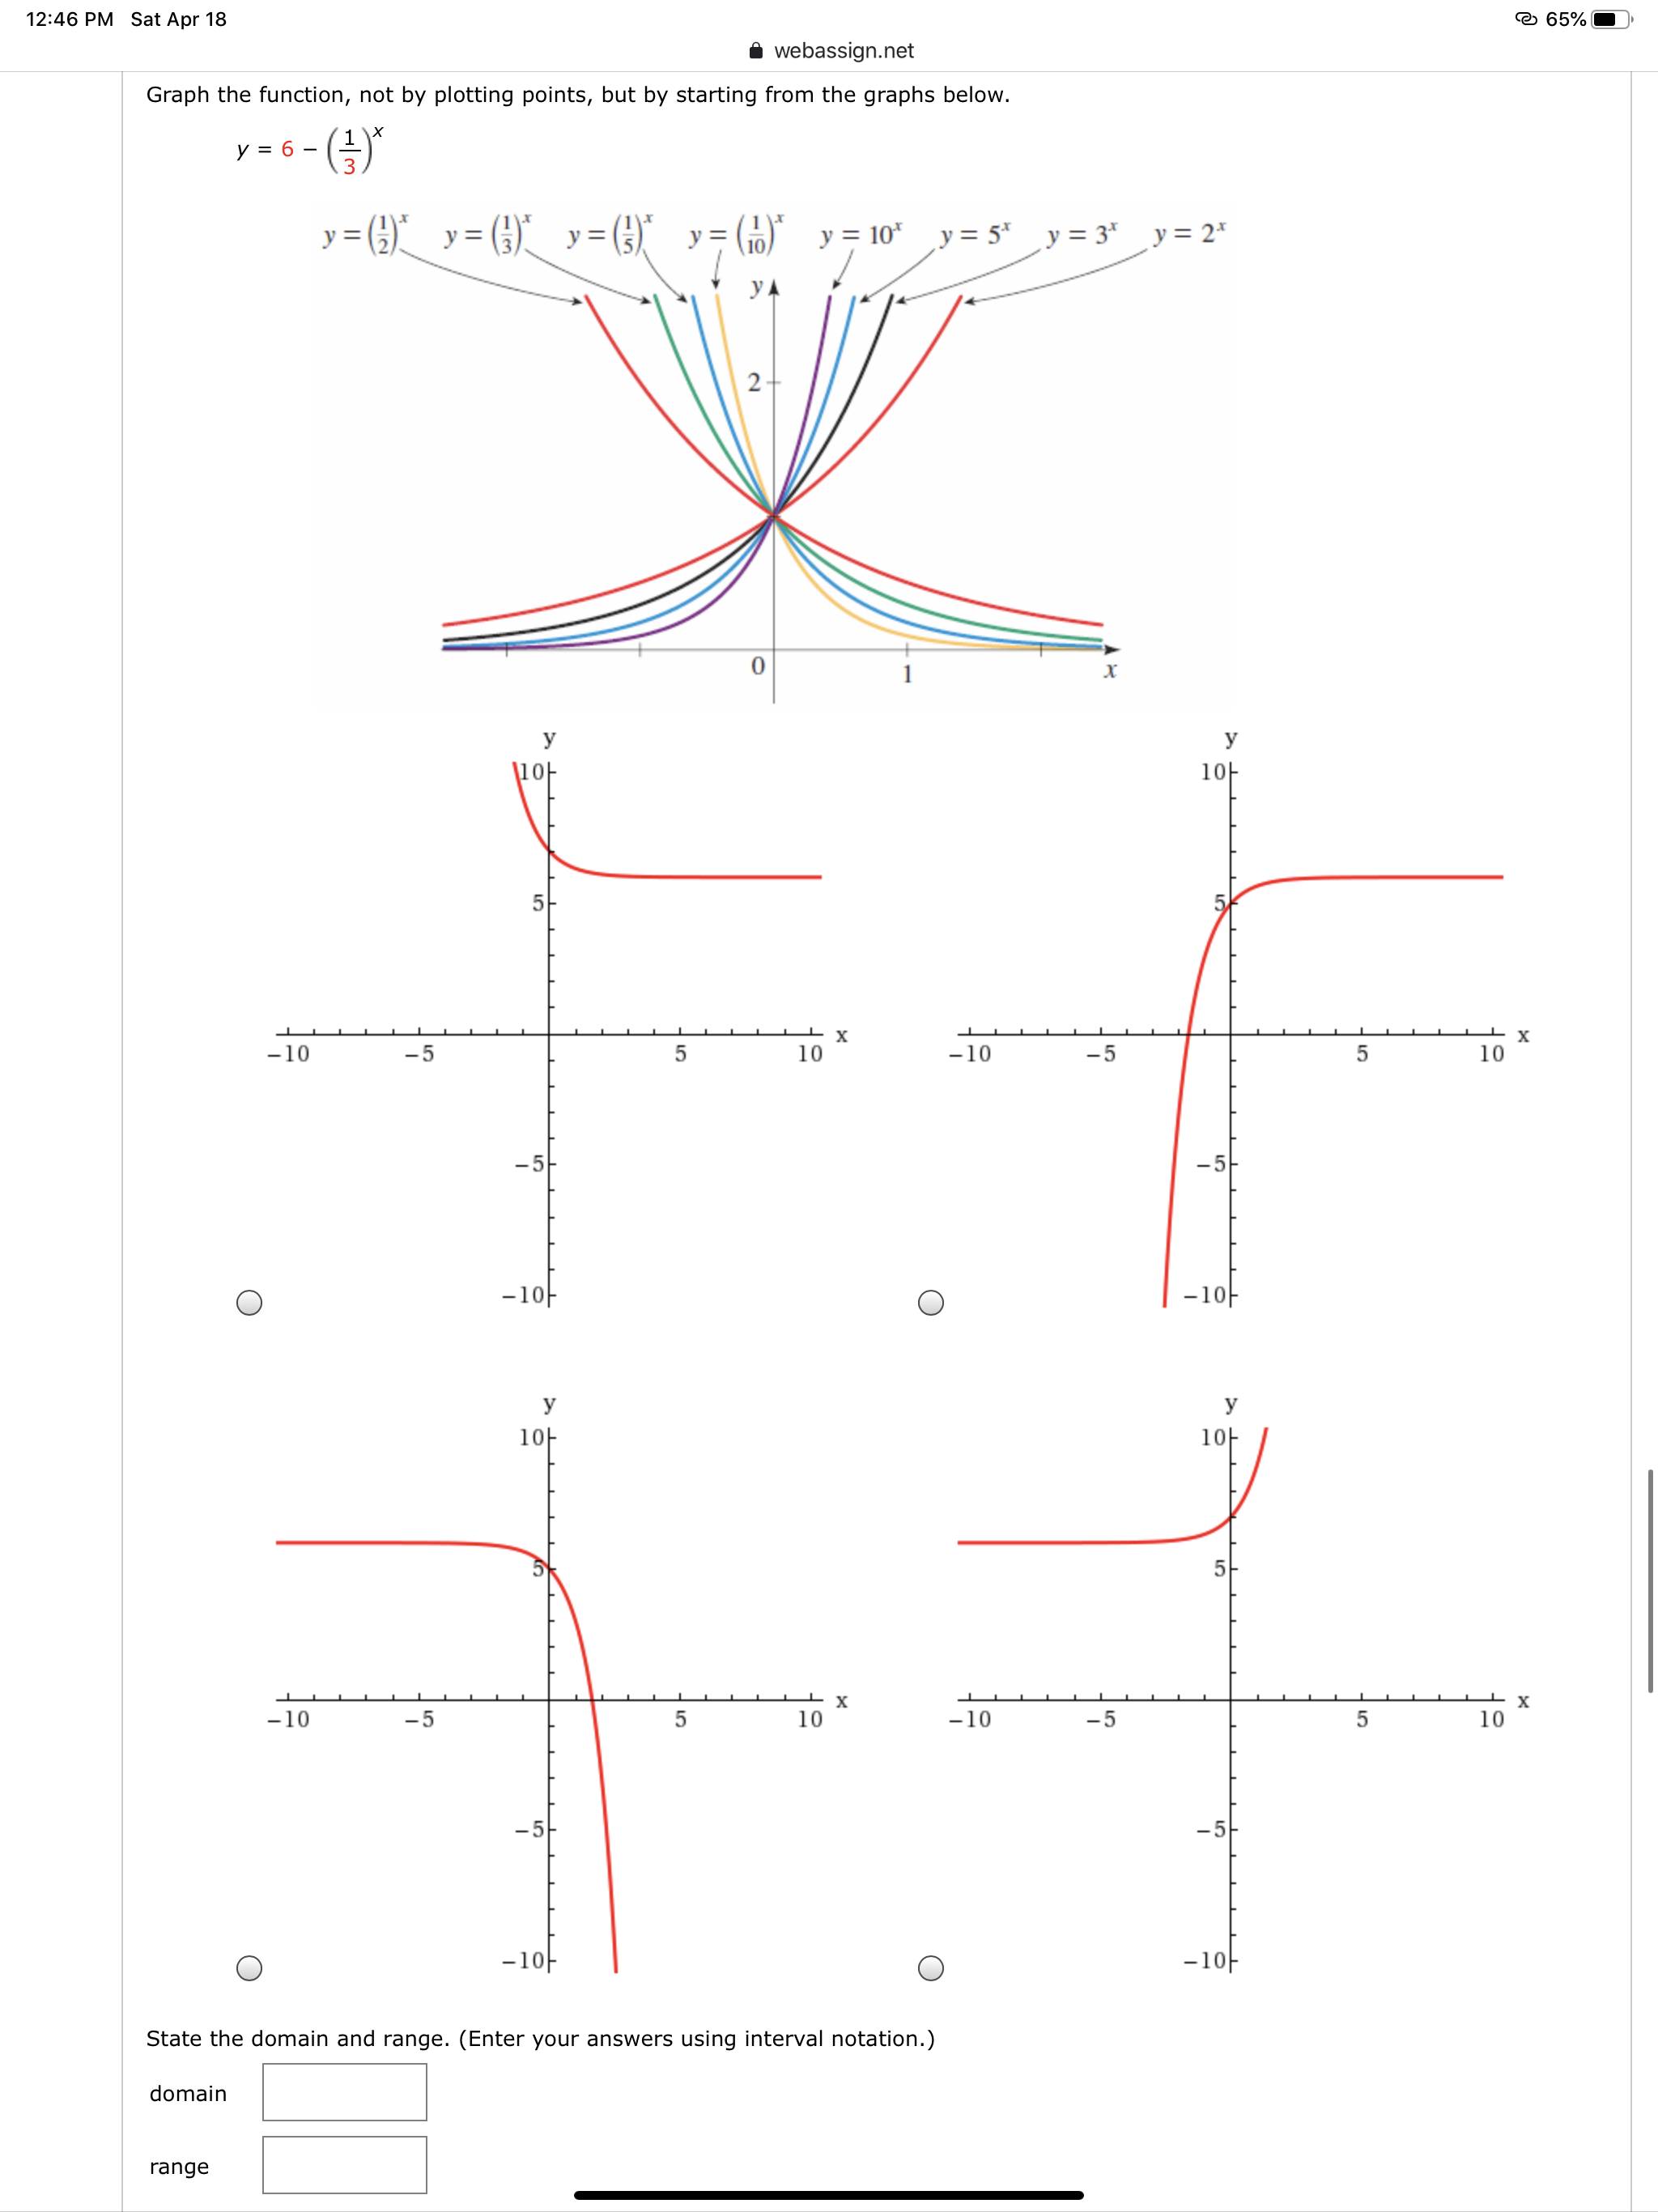 12:46 PM Sat Apr 18
e 65% |
webassign.net
Graph the function, not by plotting points, but by starting from the graphs below.
y = 6
-(-)"
y = ()_ y= (G).
y = (3)"
y = 10* y = 5*
„y = 3* _y= 2*
УА
2-
х
У
У
\1아
1아
-10
-5
10
-10
-5
10
-5
-1아
-1아
y
1아
10H
5
х
х
-10
-5
10
-10
-5
10
-5
-1아
-1아
State the domain and range. (Enter your answers using interval notation.)
domain
range
